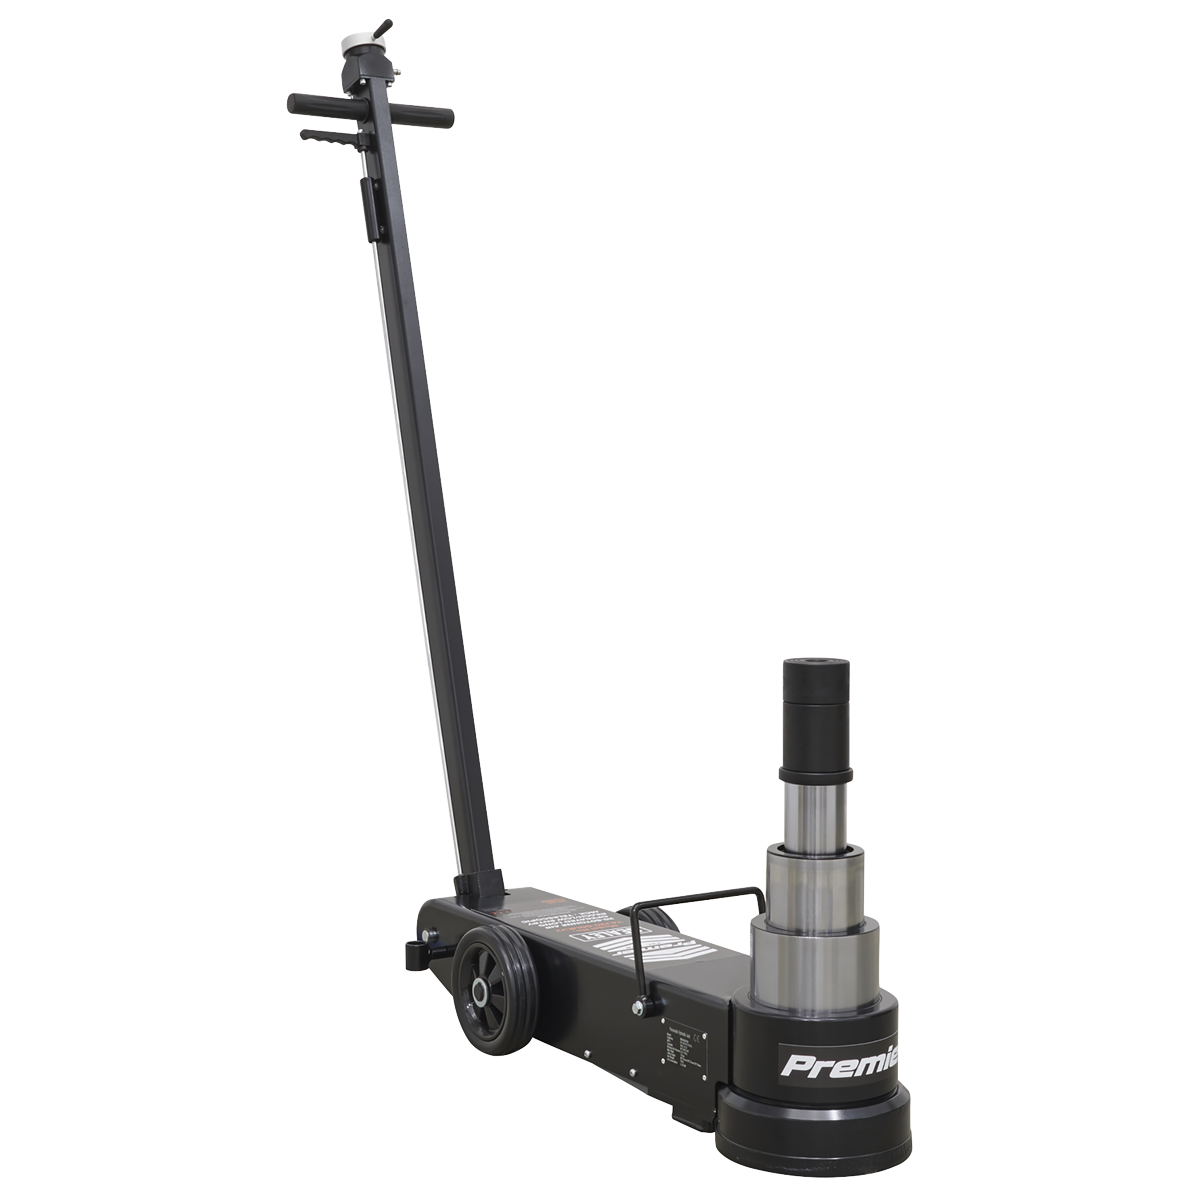 Air Operated Jack 20-60 Tonne Telescopic - Long Reach/Low Profile